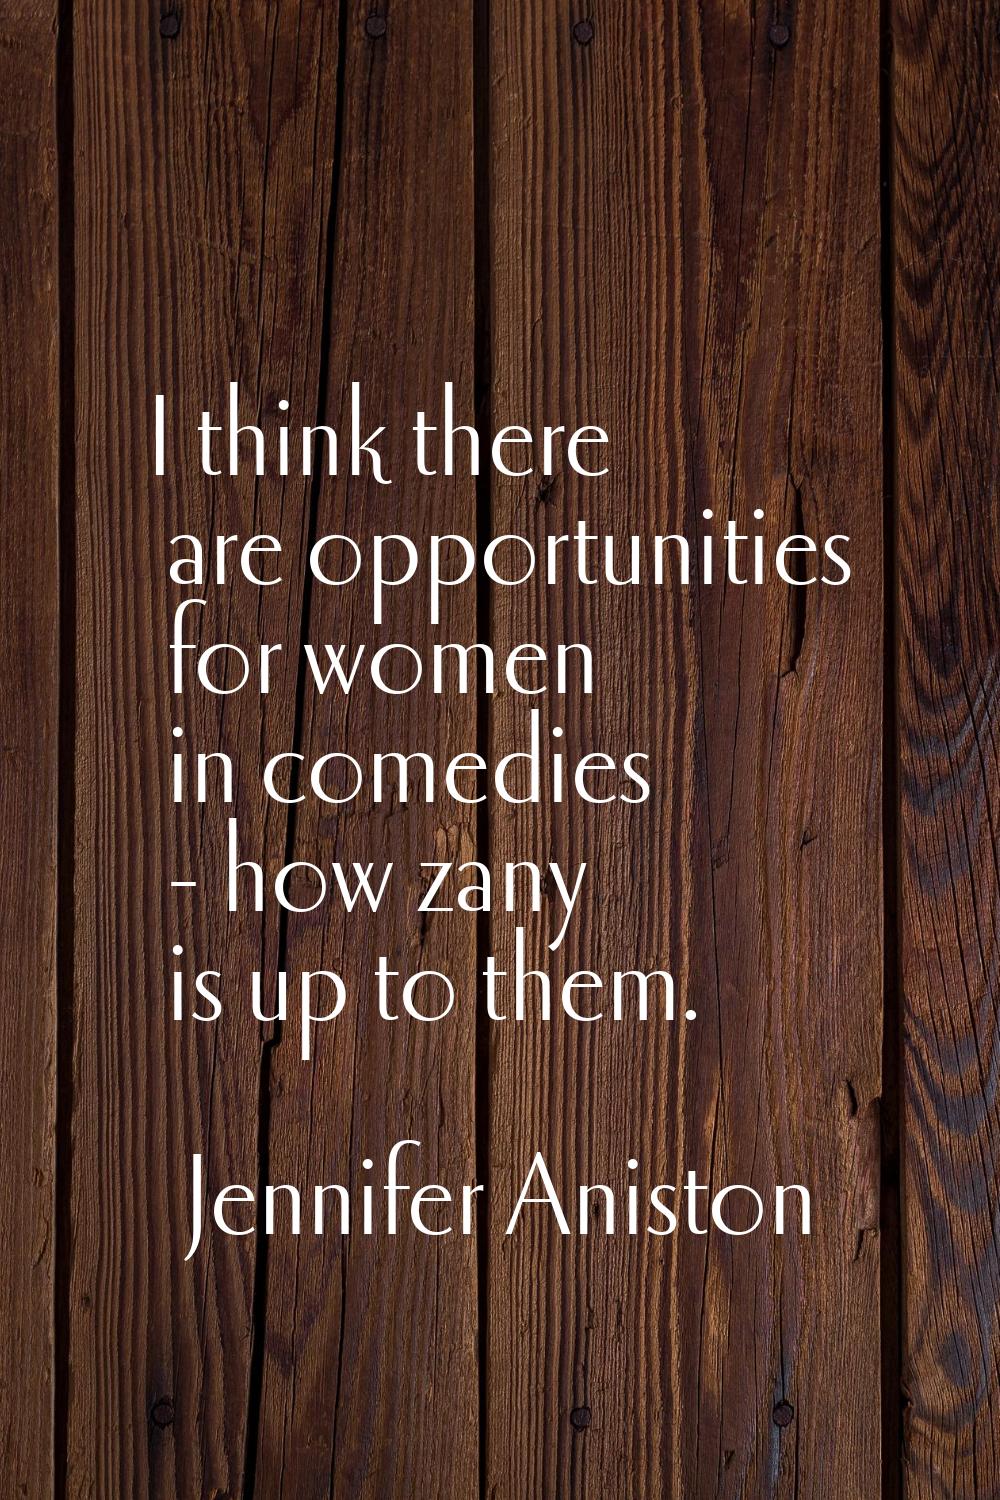 I think there are opportunities for women in comedies - how zany is up to them.